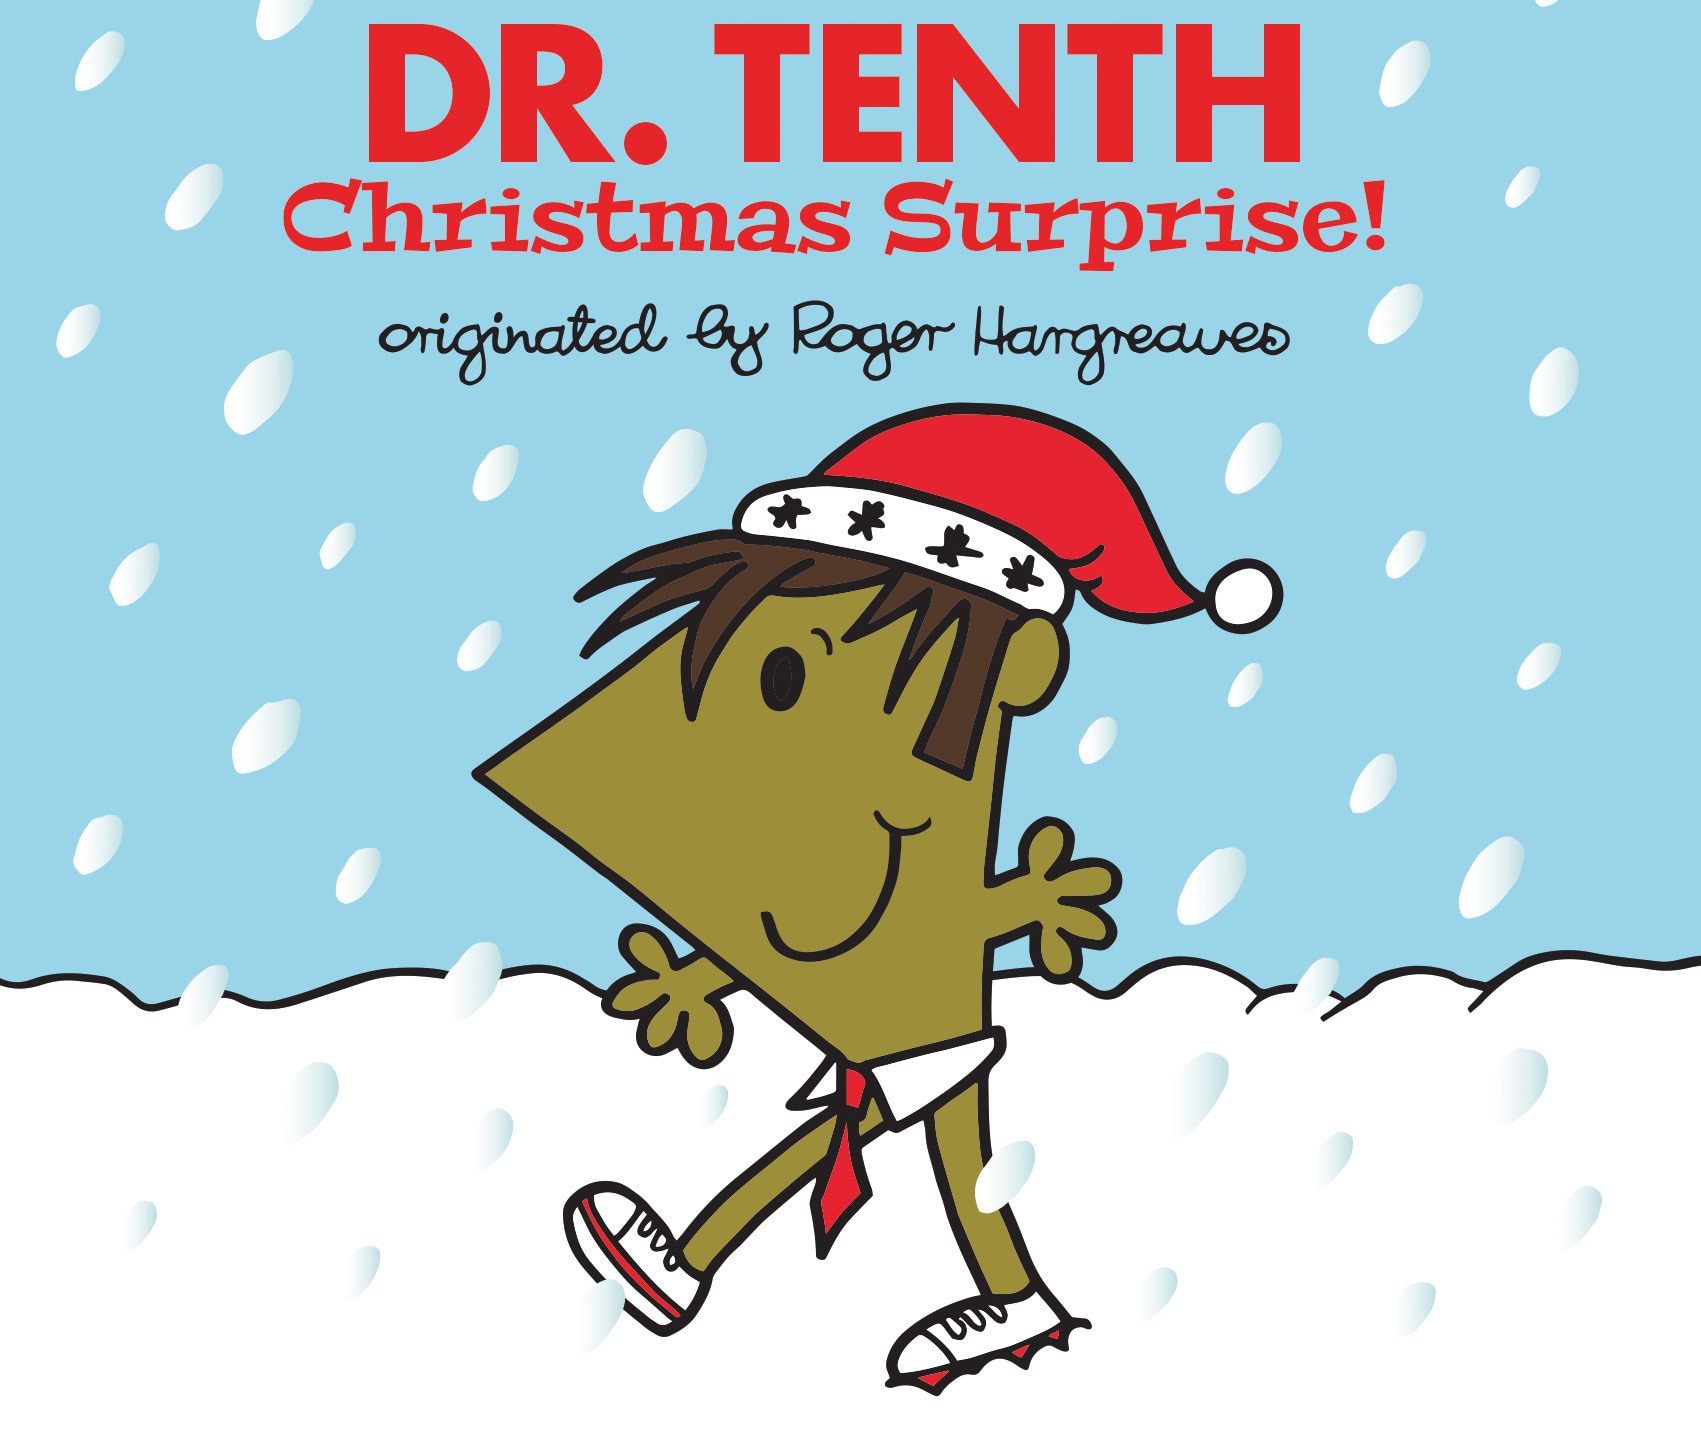 Image of Dr. Tenth front cover with cartoon Tenth Doctor in the snow